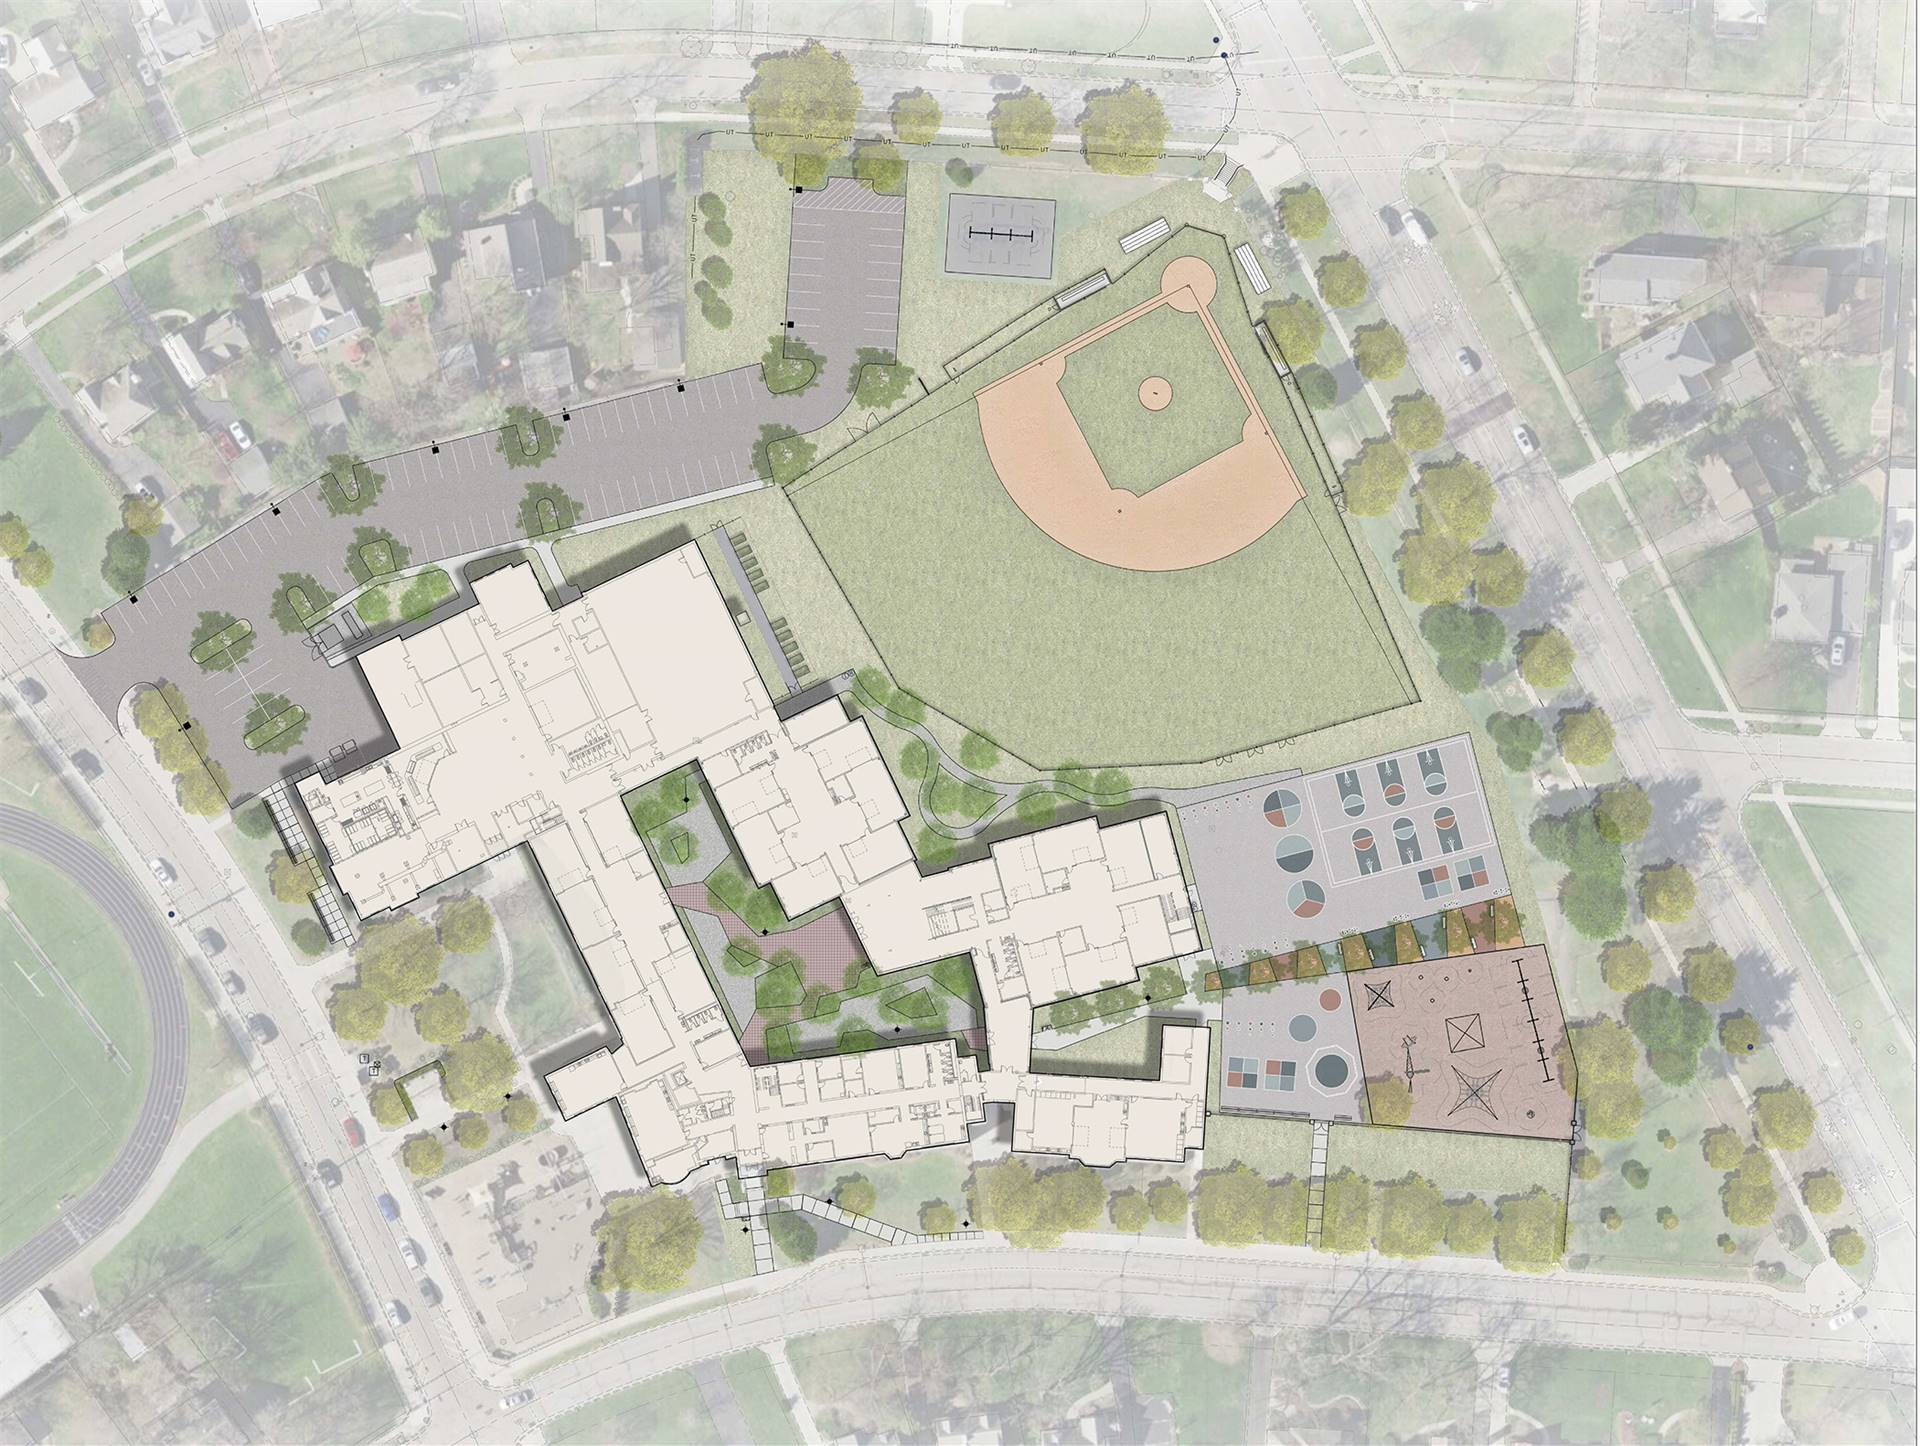 The overall site plan for Barrington Elementary School